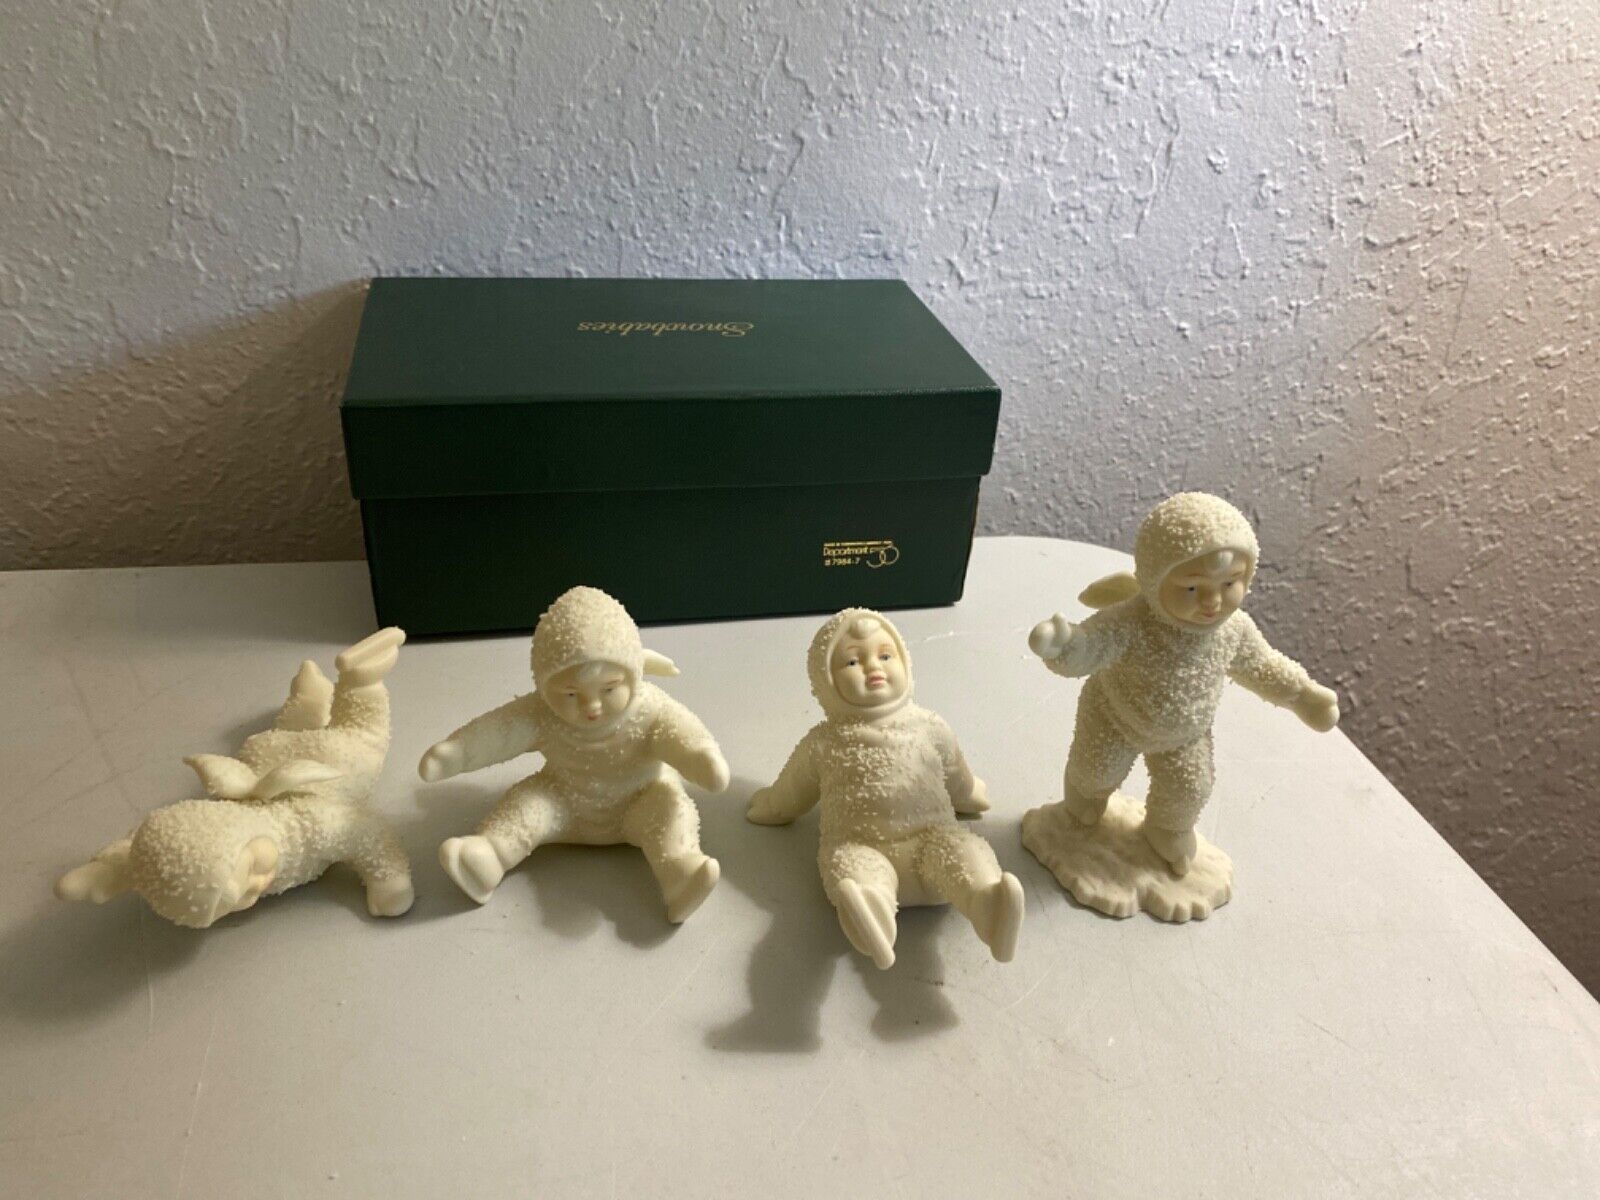 DEPT 56 SNOWBABIES ANGELS SNOW ALL FALL DOWN NOS # 7984-7 WITH BOX GREAT SHAPE